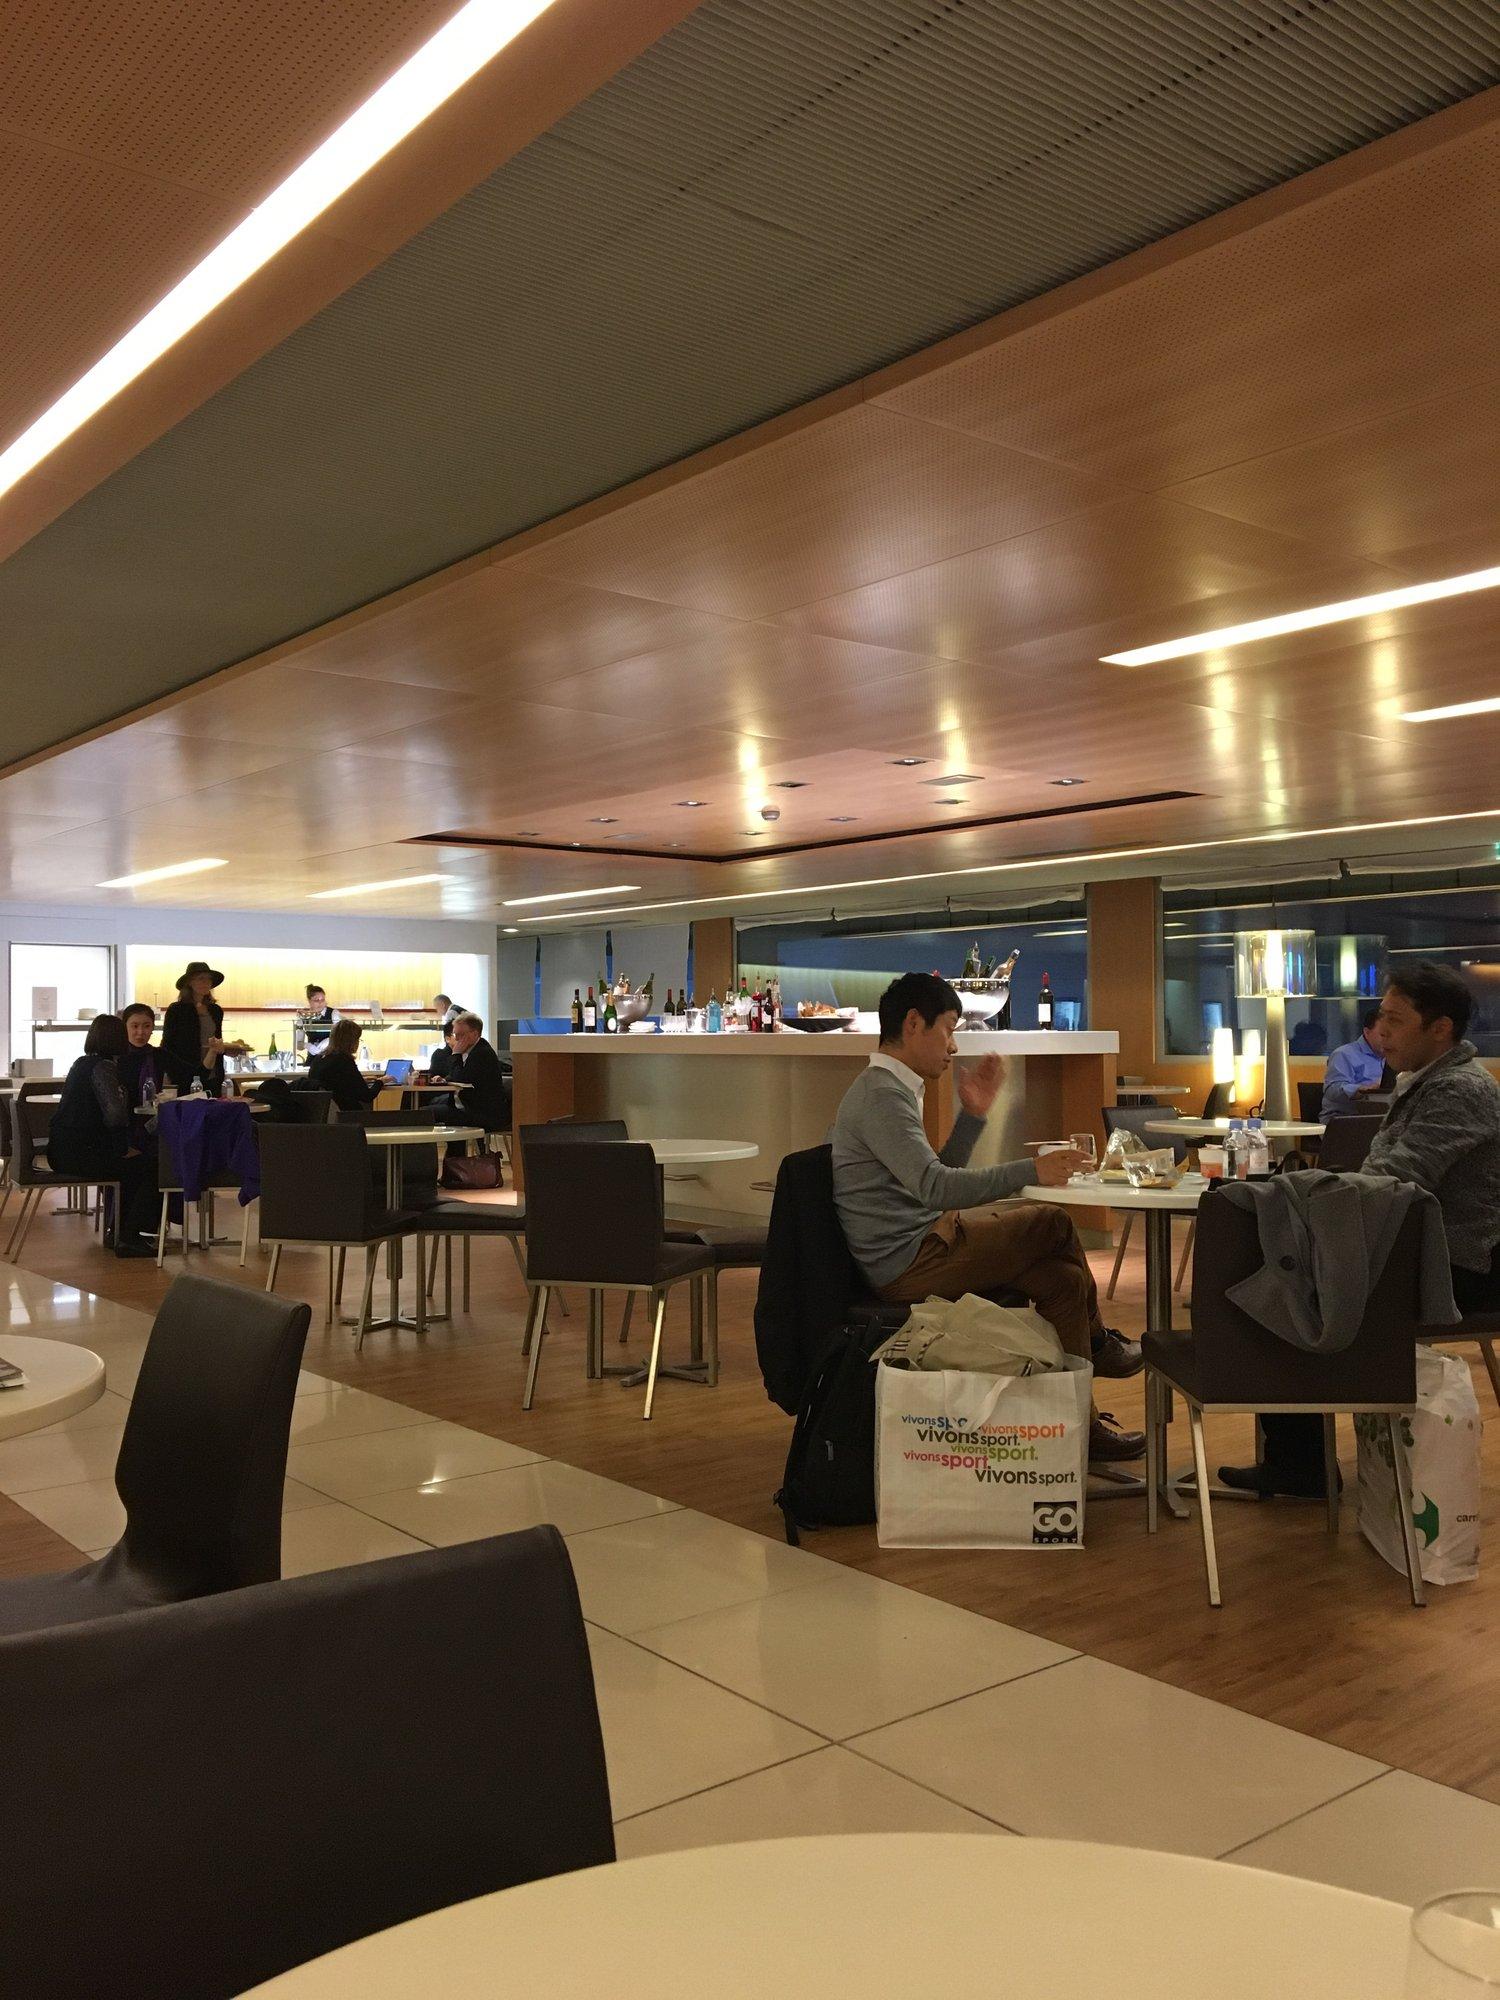 Air France Lounge (Concourse K) image 1 of 35